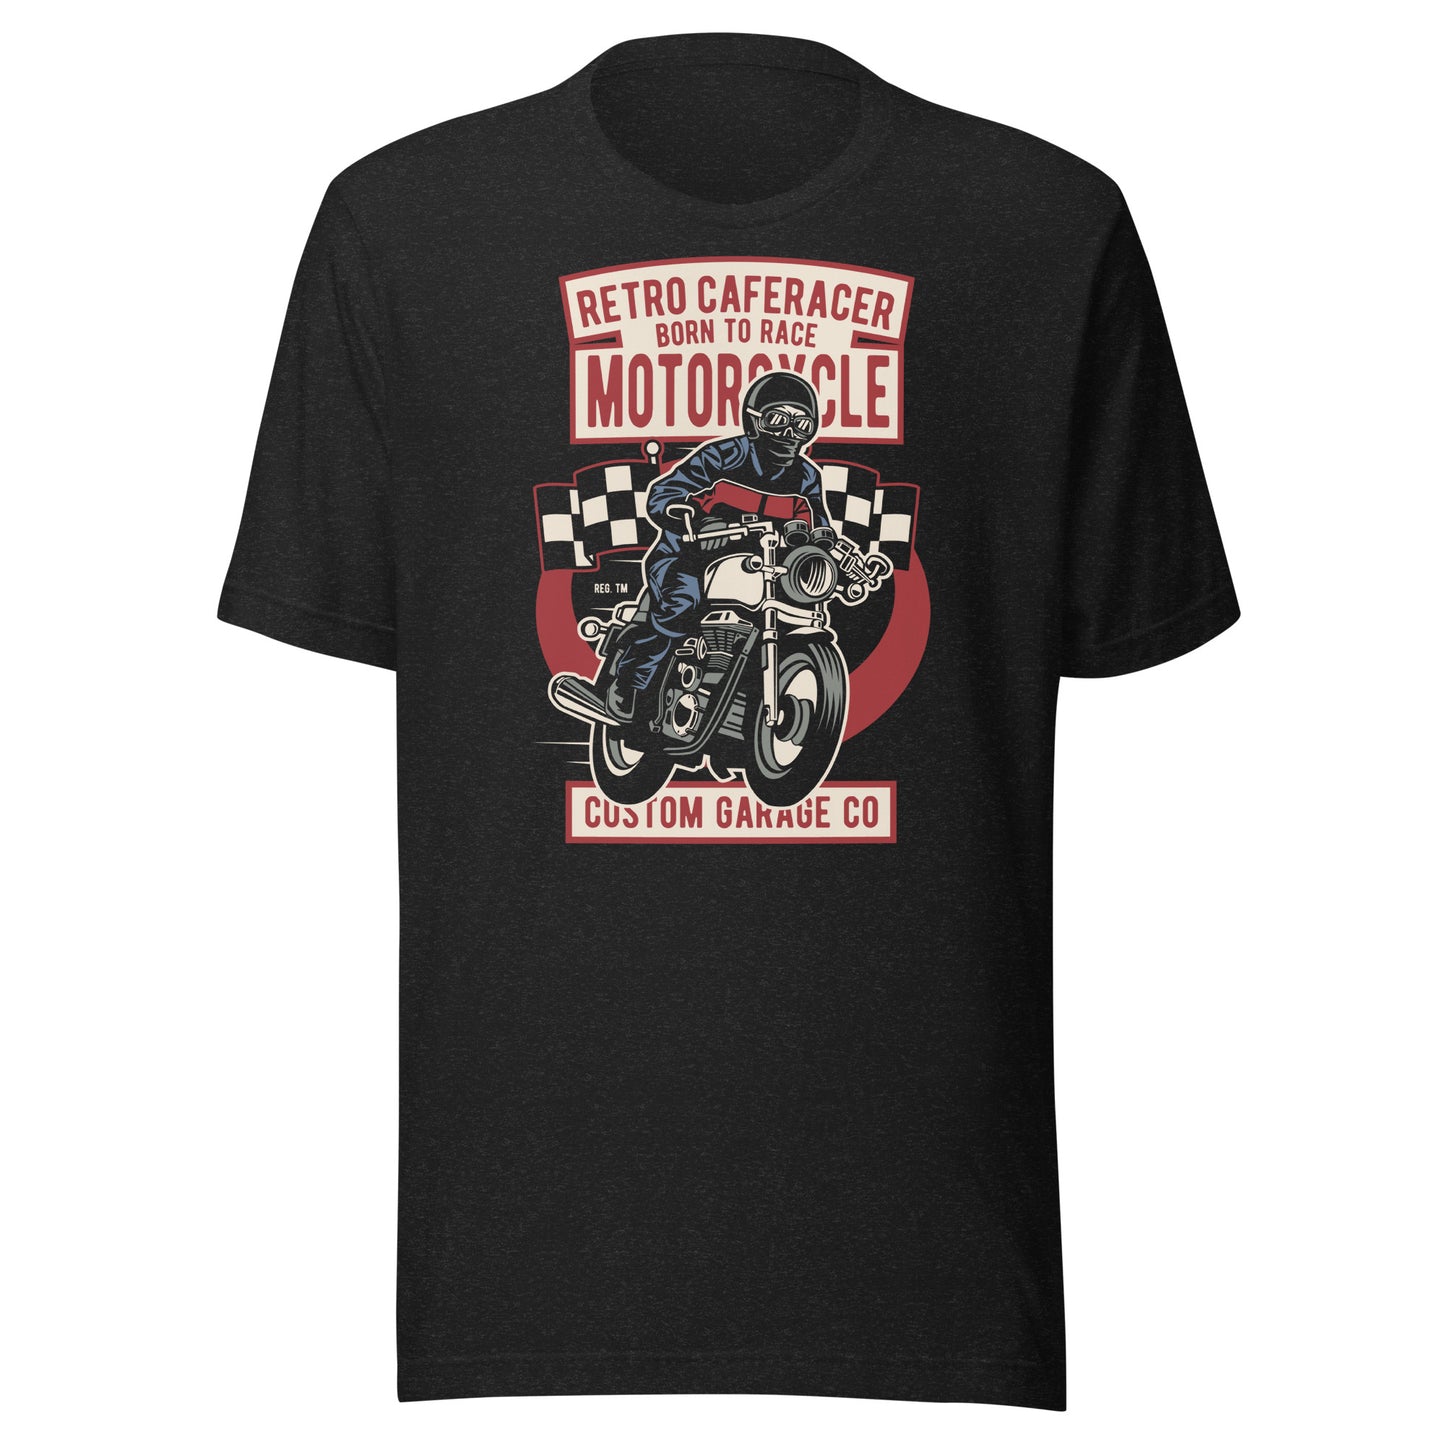 Vintage Vibes: Retro Caferacer T-Shirts - Rev Up Your Style!